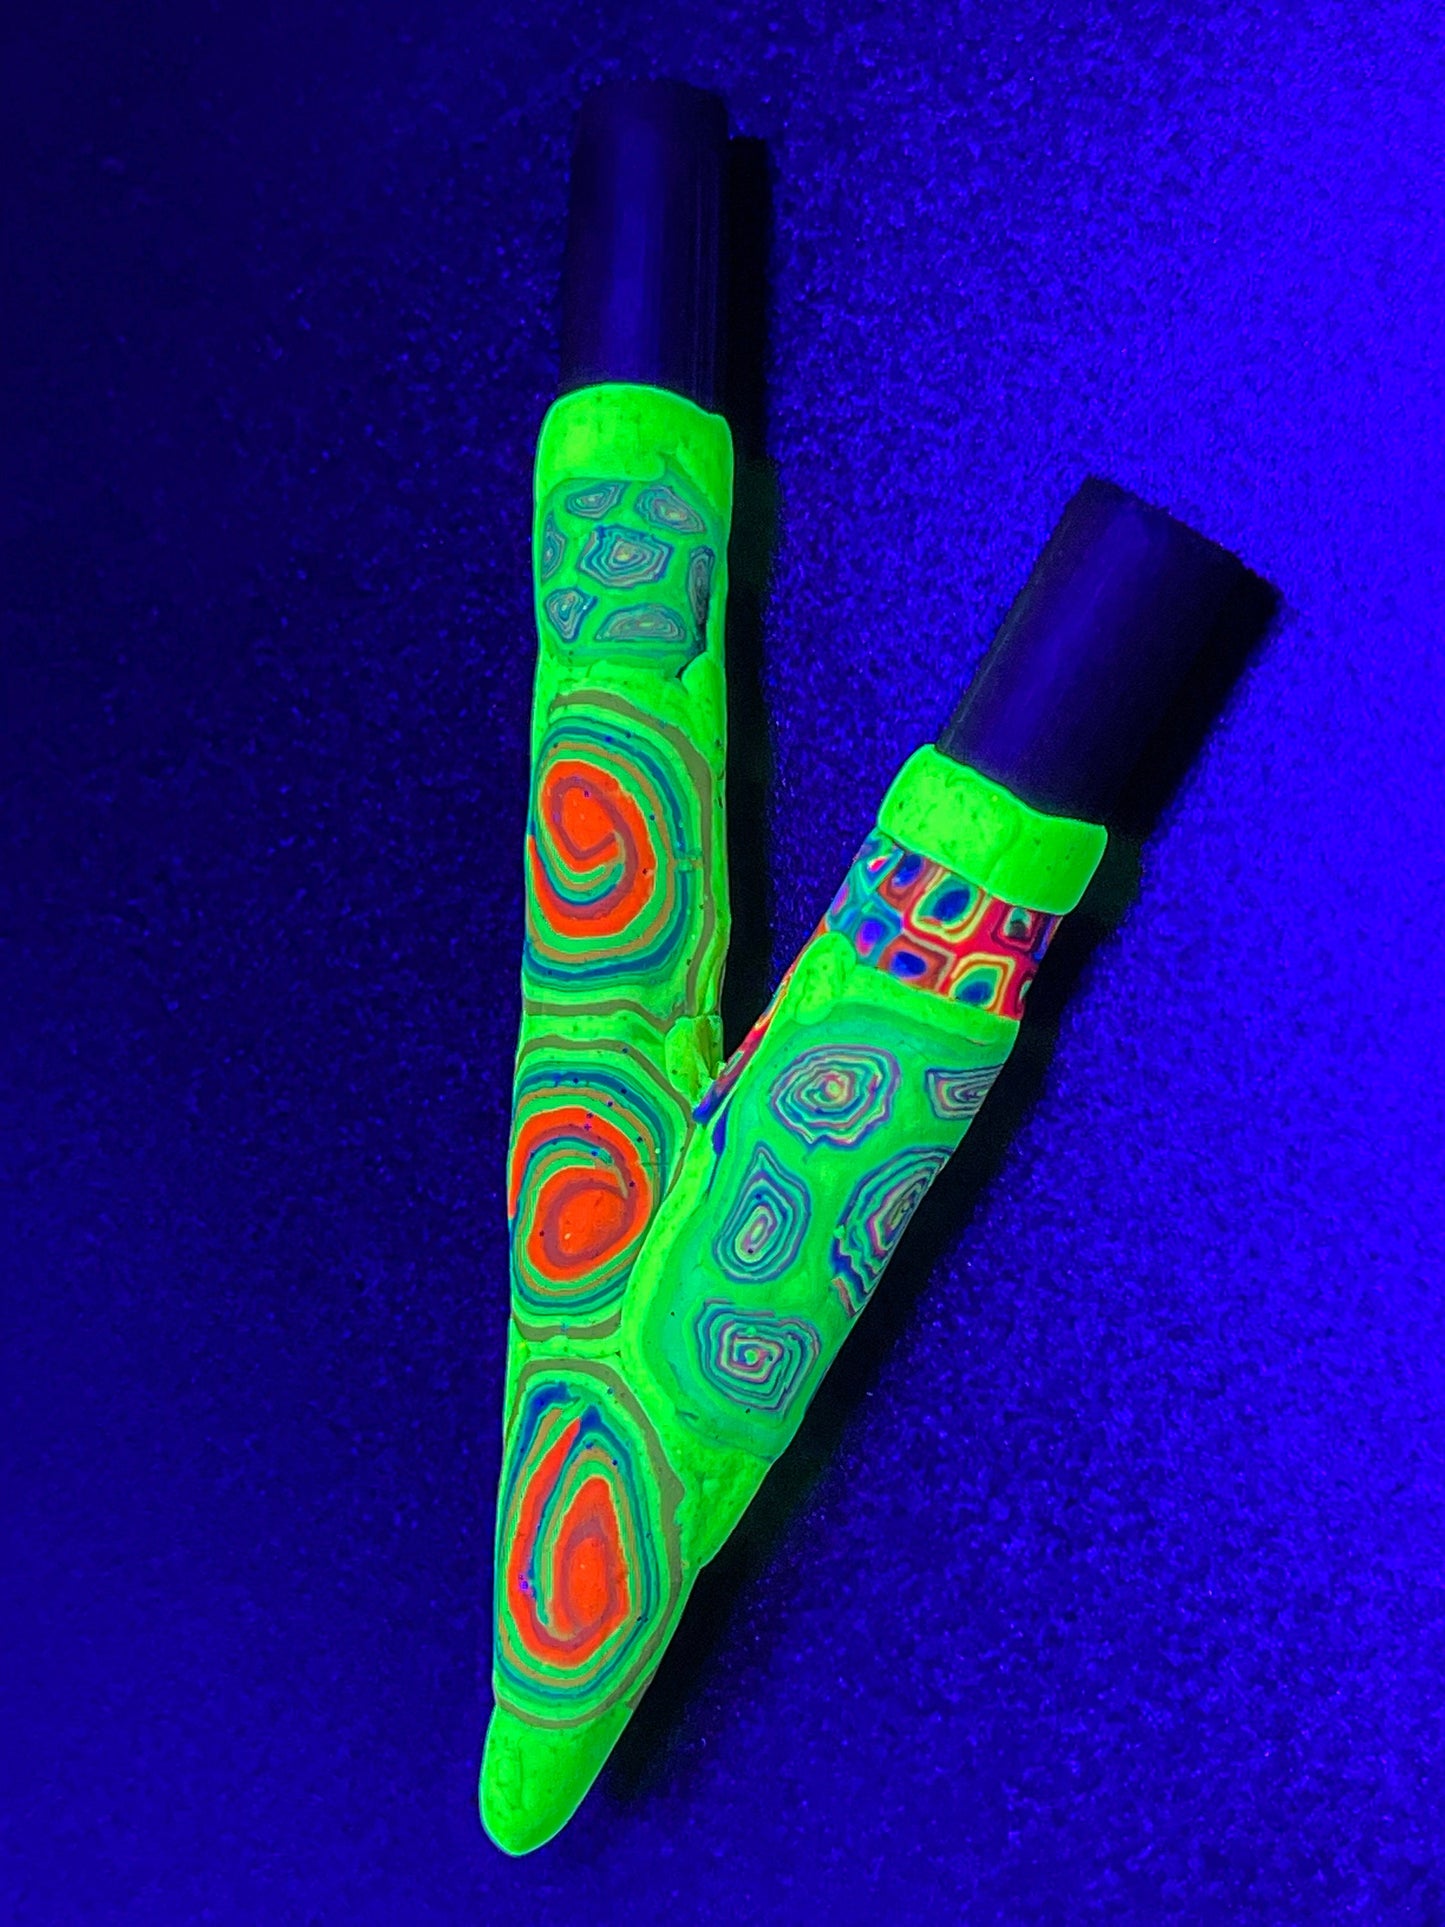 Beautiful Kuripe self applicator - Traditionally for Rapè  - handmade UV glowing polymer clay eye candy psychedelic spiral made with love